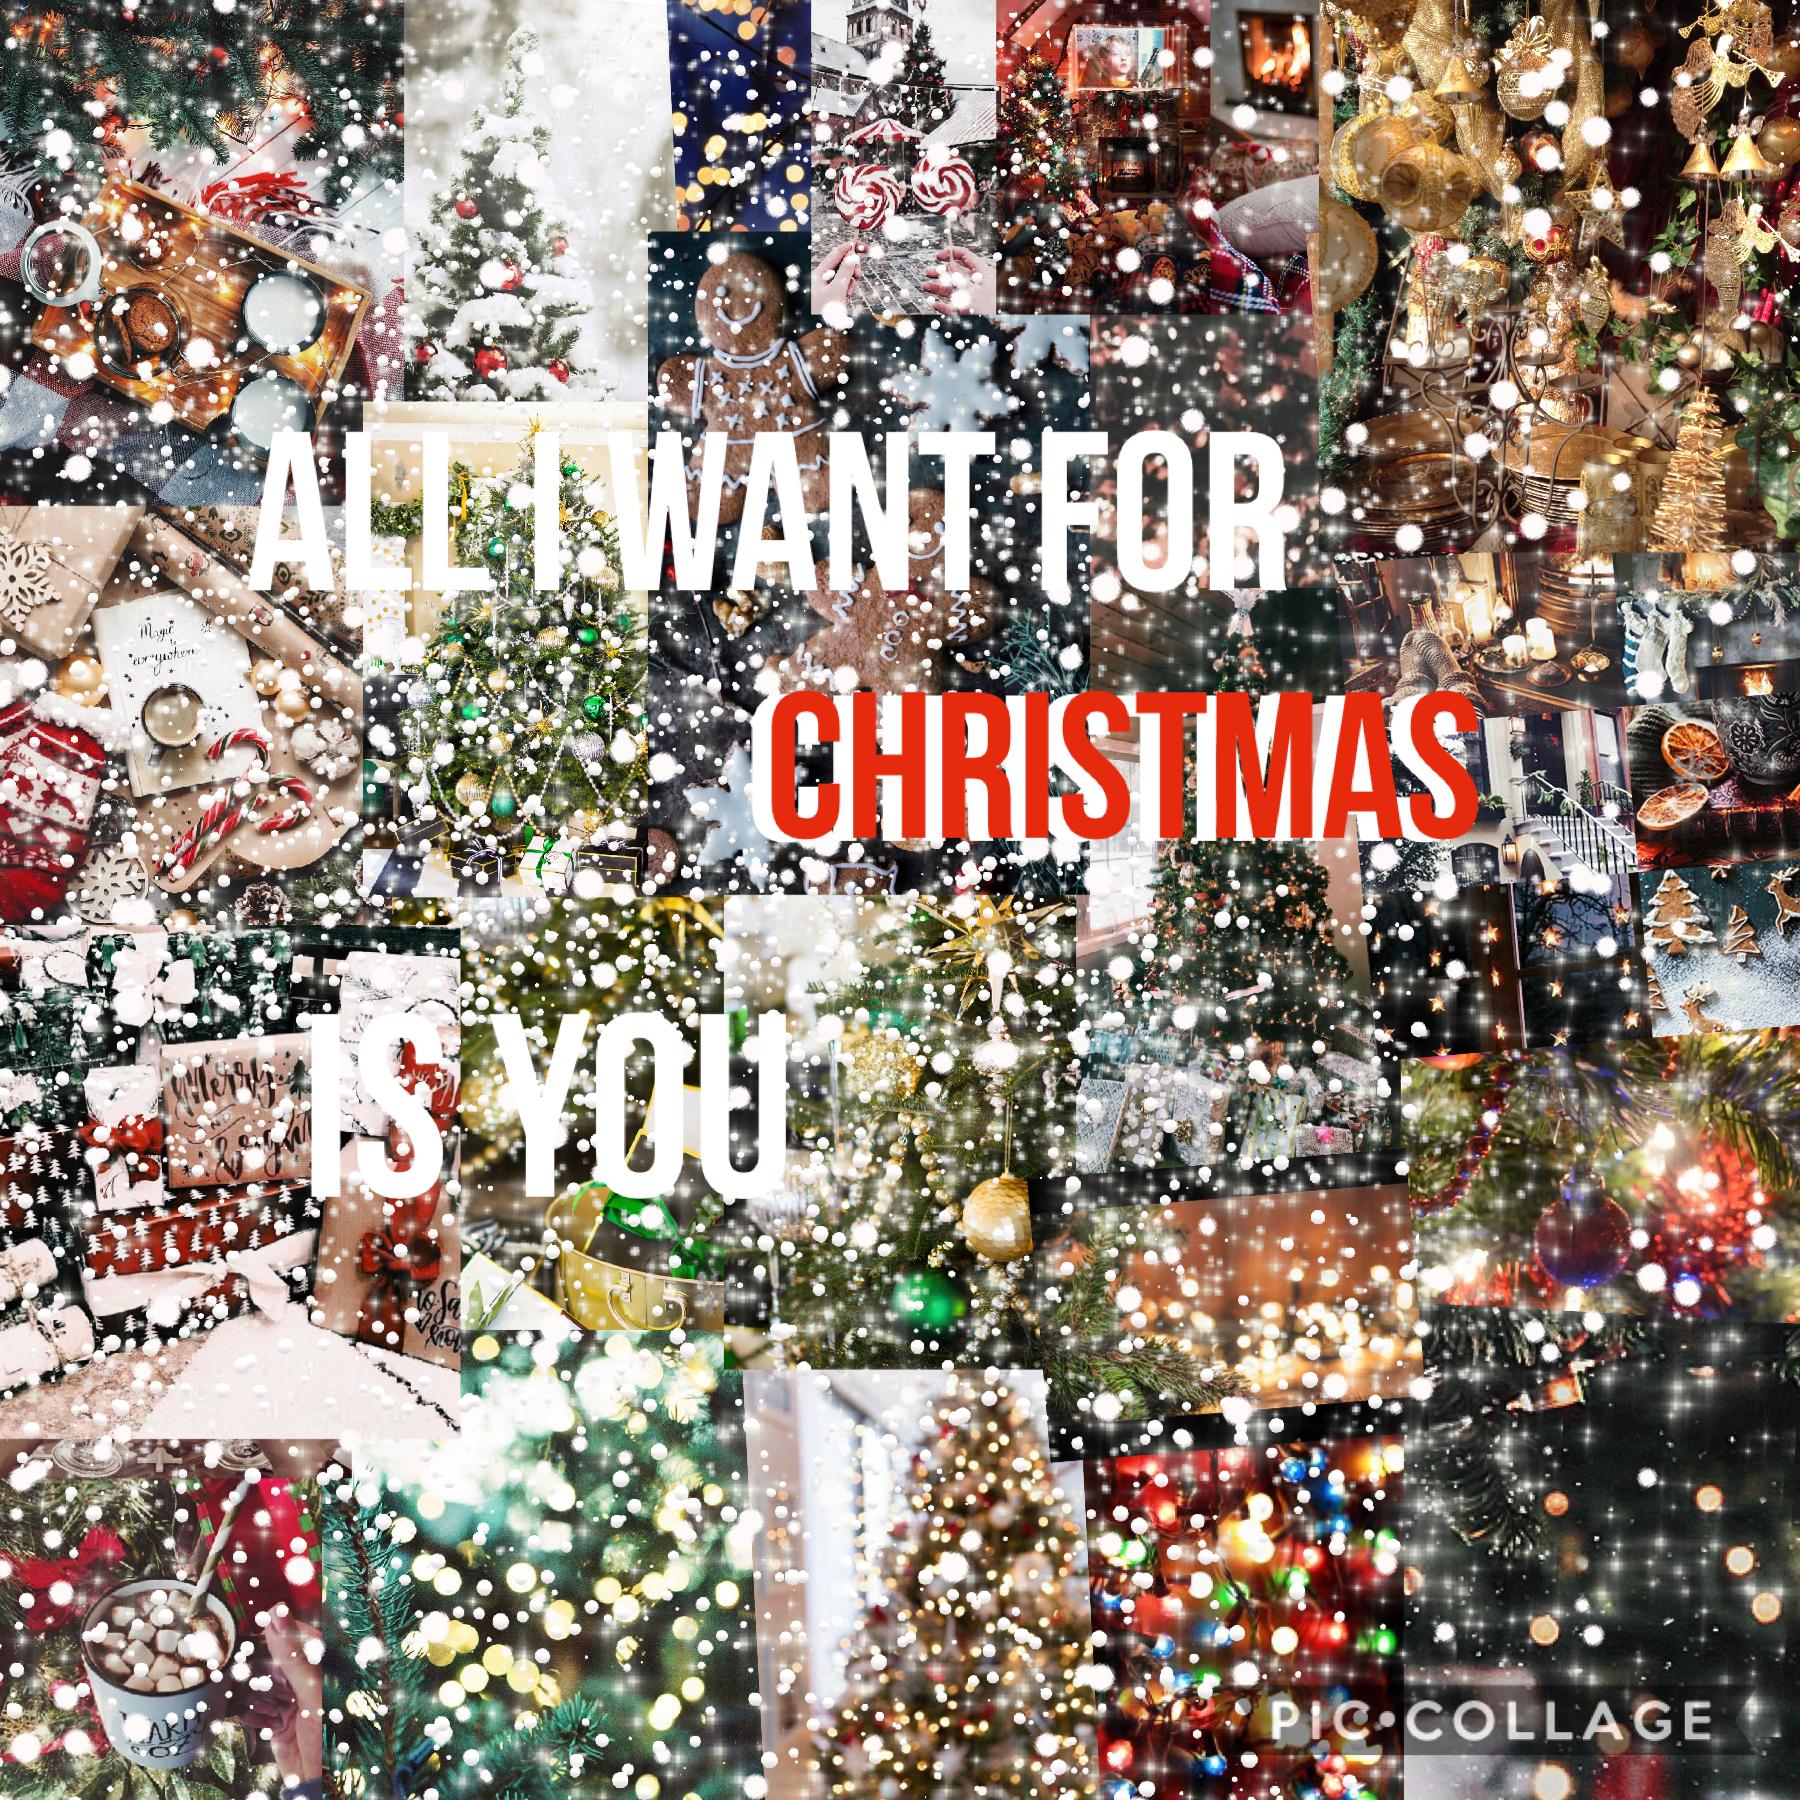 🎅🏼TAP🎅🏼
Thx a lot -a-n-g-e-l- for the tutorial. It helped me a lot. This is probably one of my fav collages I made so far.

Thx for support and love stars